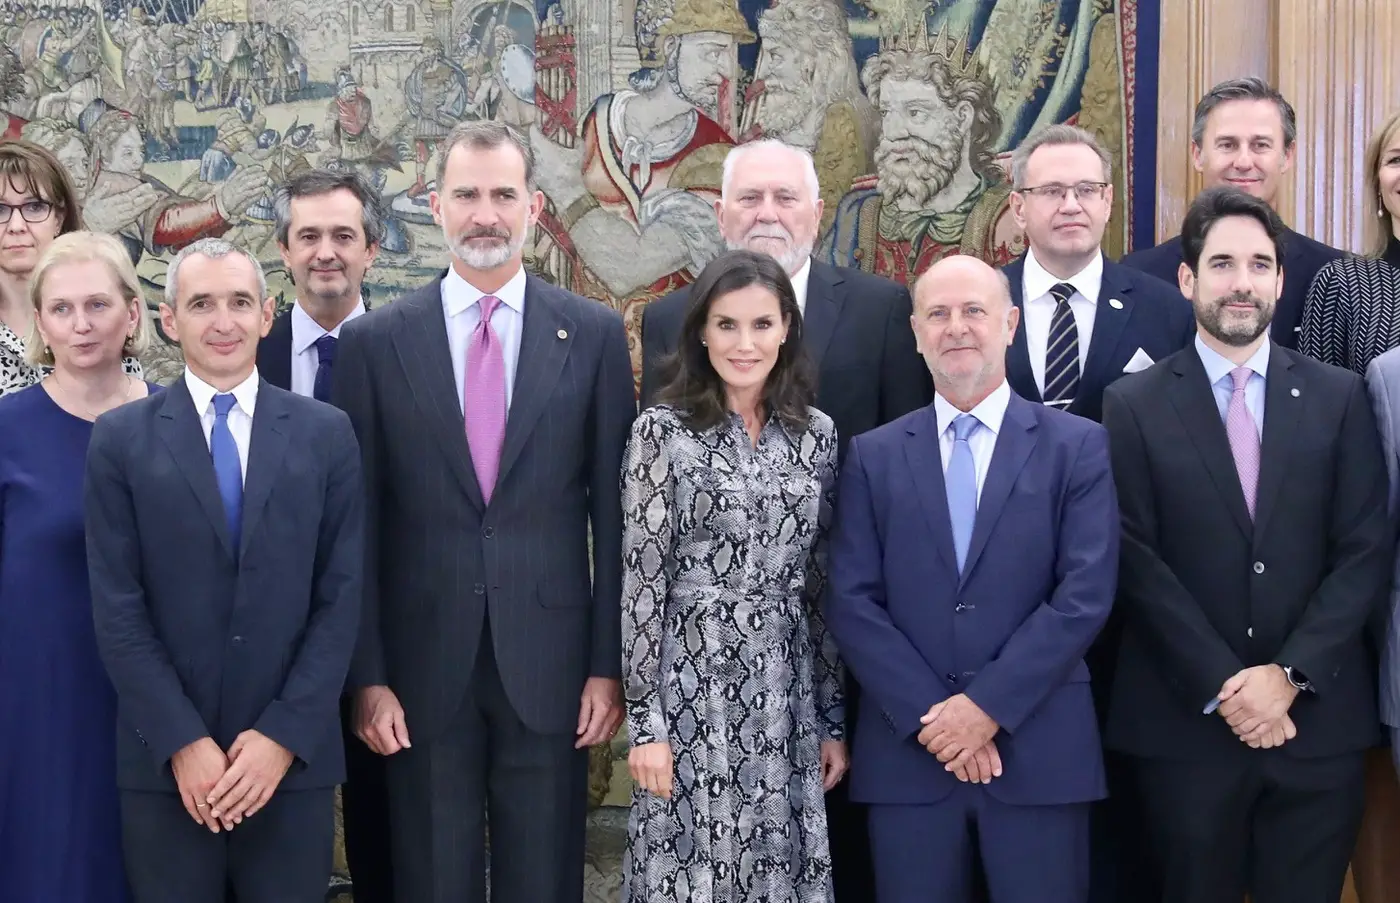 Queen Letizia in Massimo Dutti Leopard Print Midi Dress from Palace Audience